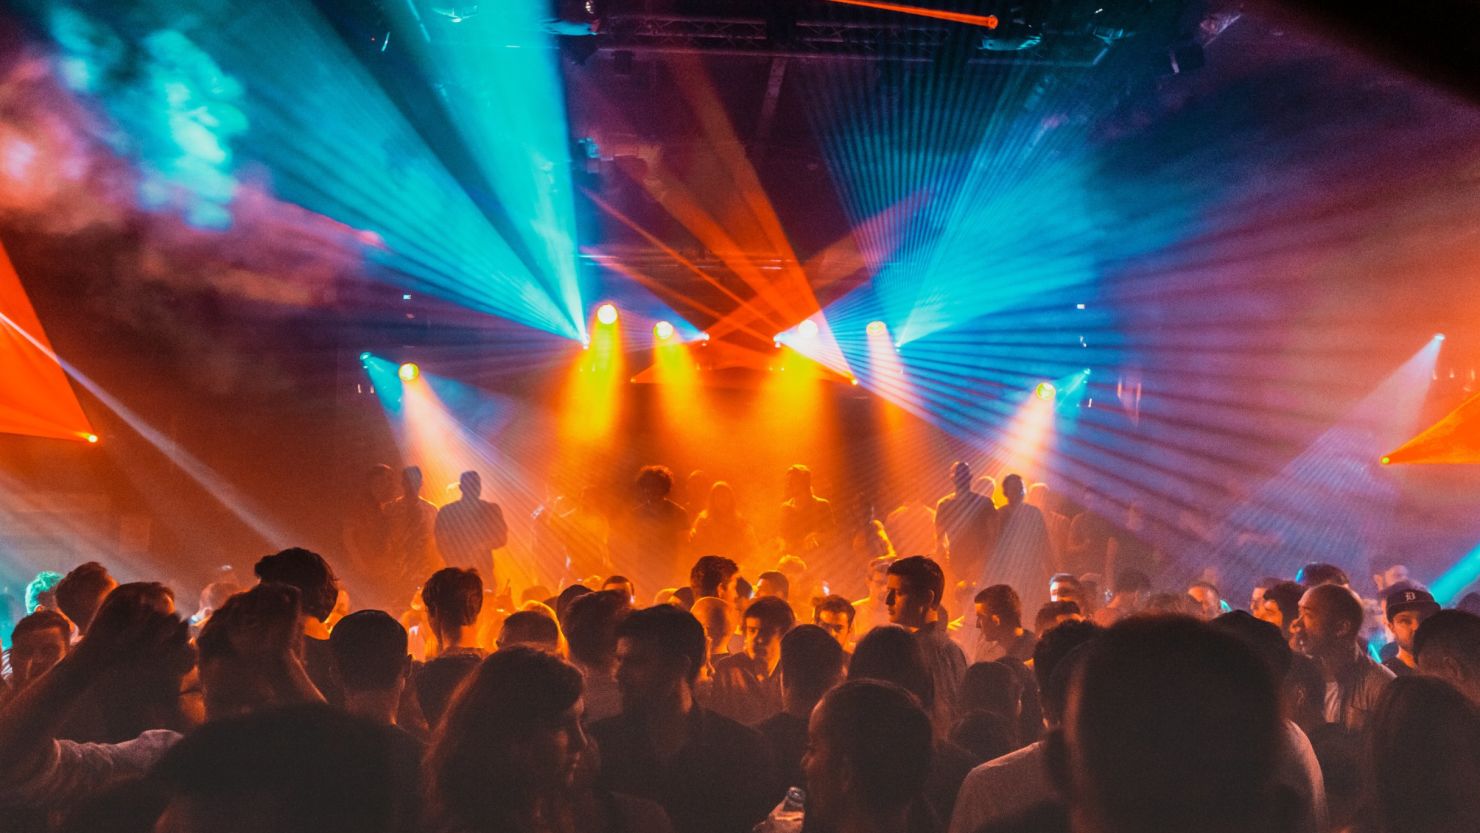 London's Fabric has welcomed 6 million club-goers over 17 years.